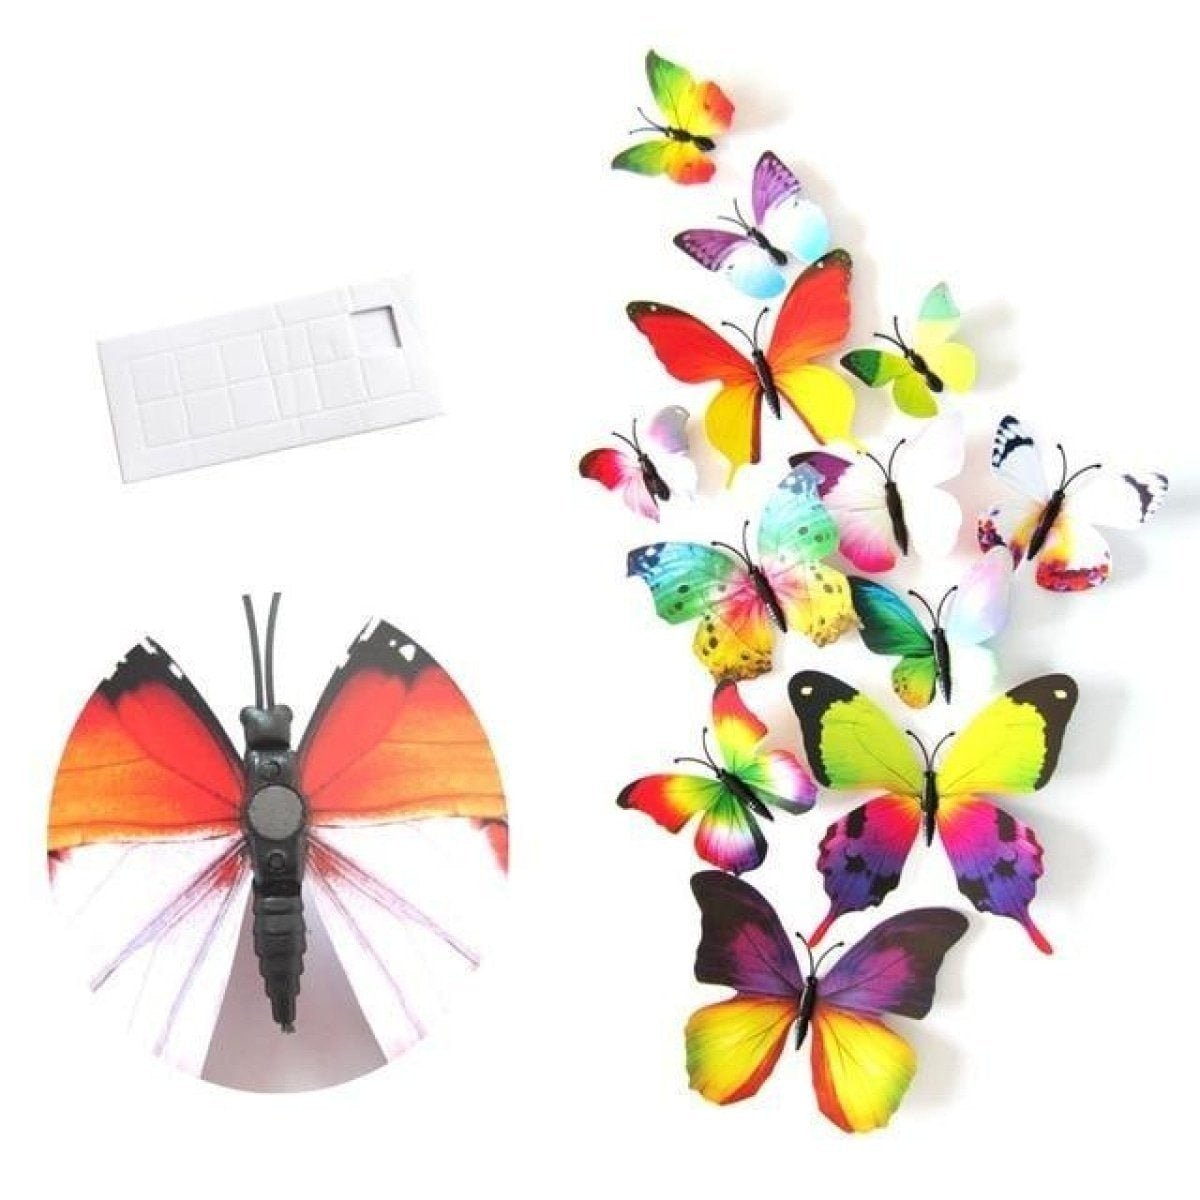 12pcs PVC 3D Butterfly Wall Fridge Decorations Butterflies Art Magnet Pin Toy Plastic Shapes - Magnet 8 - - Asia Sell